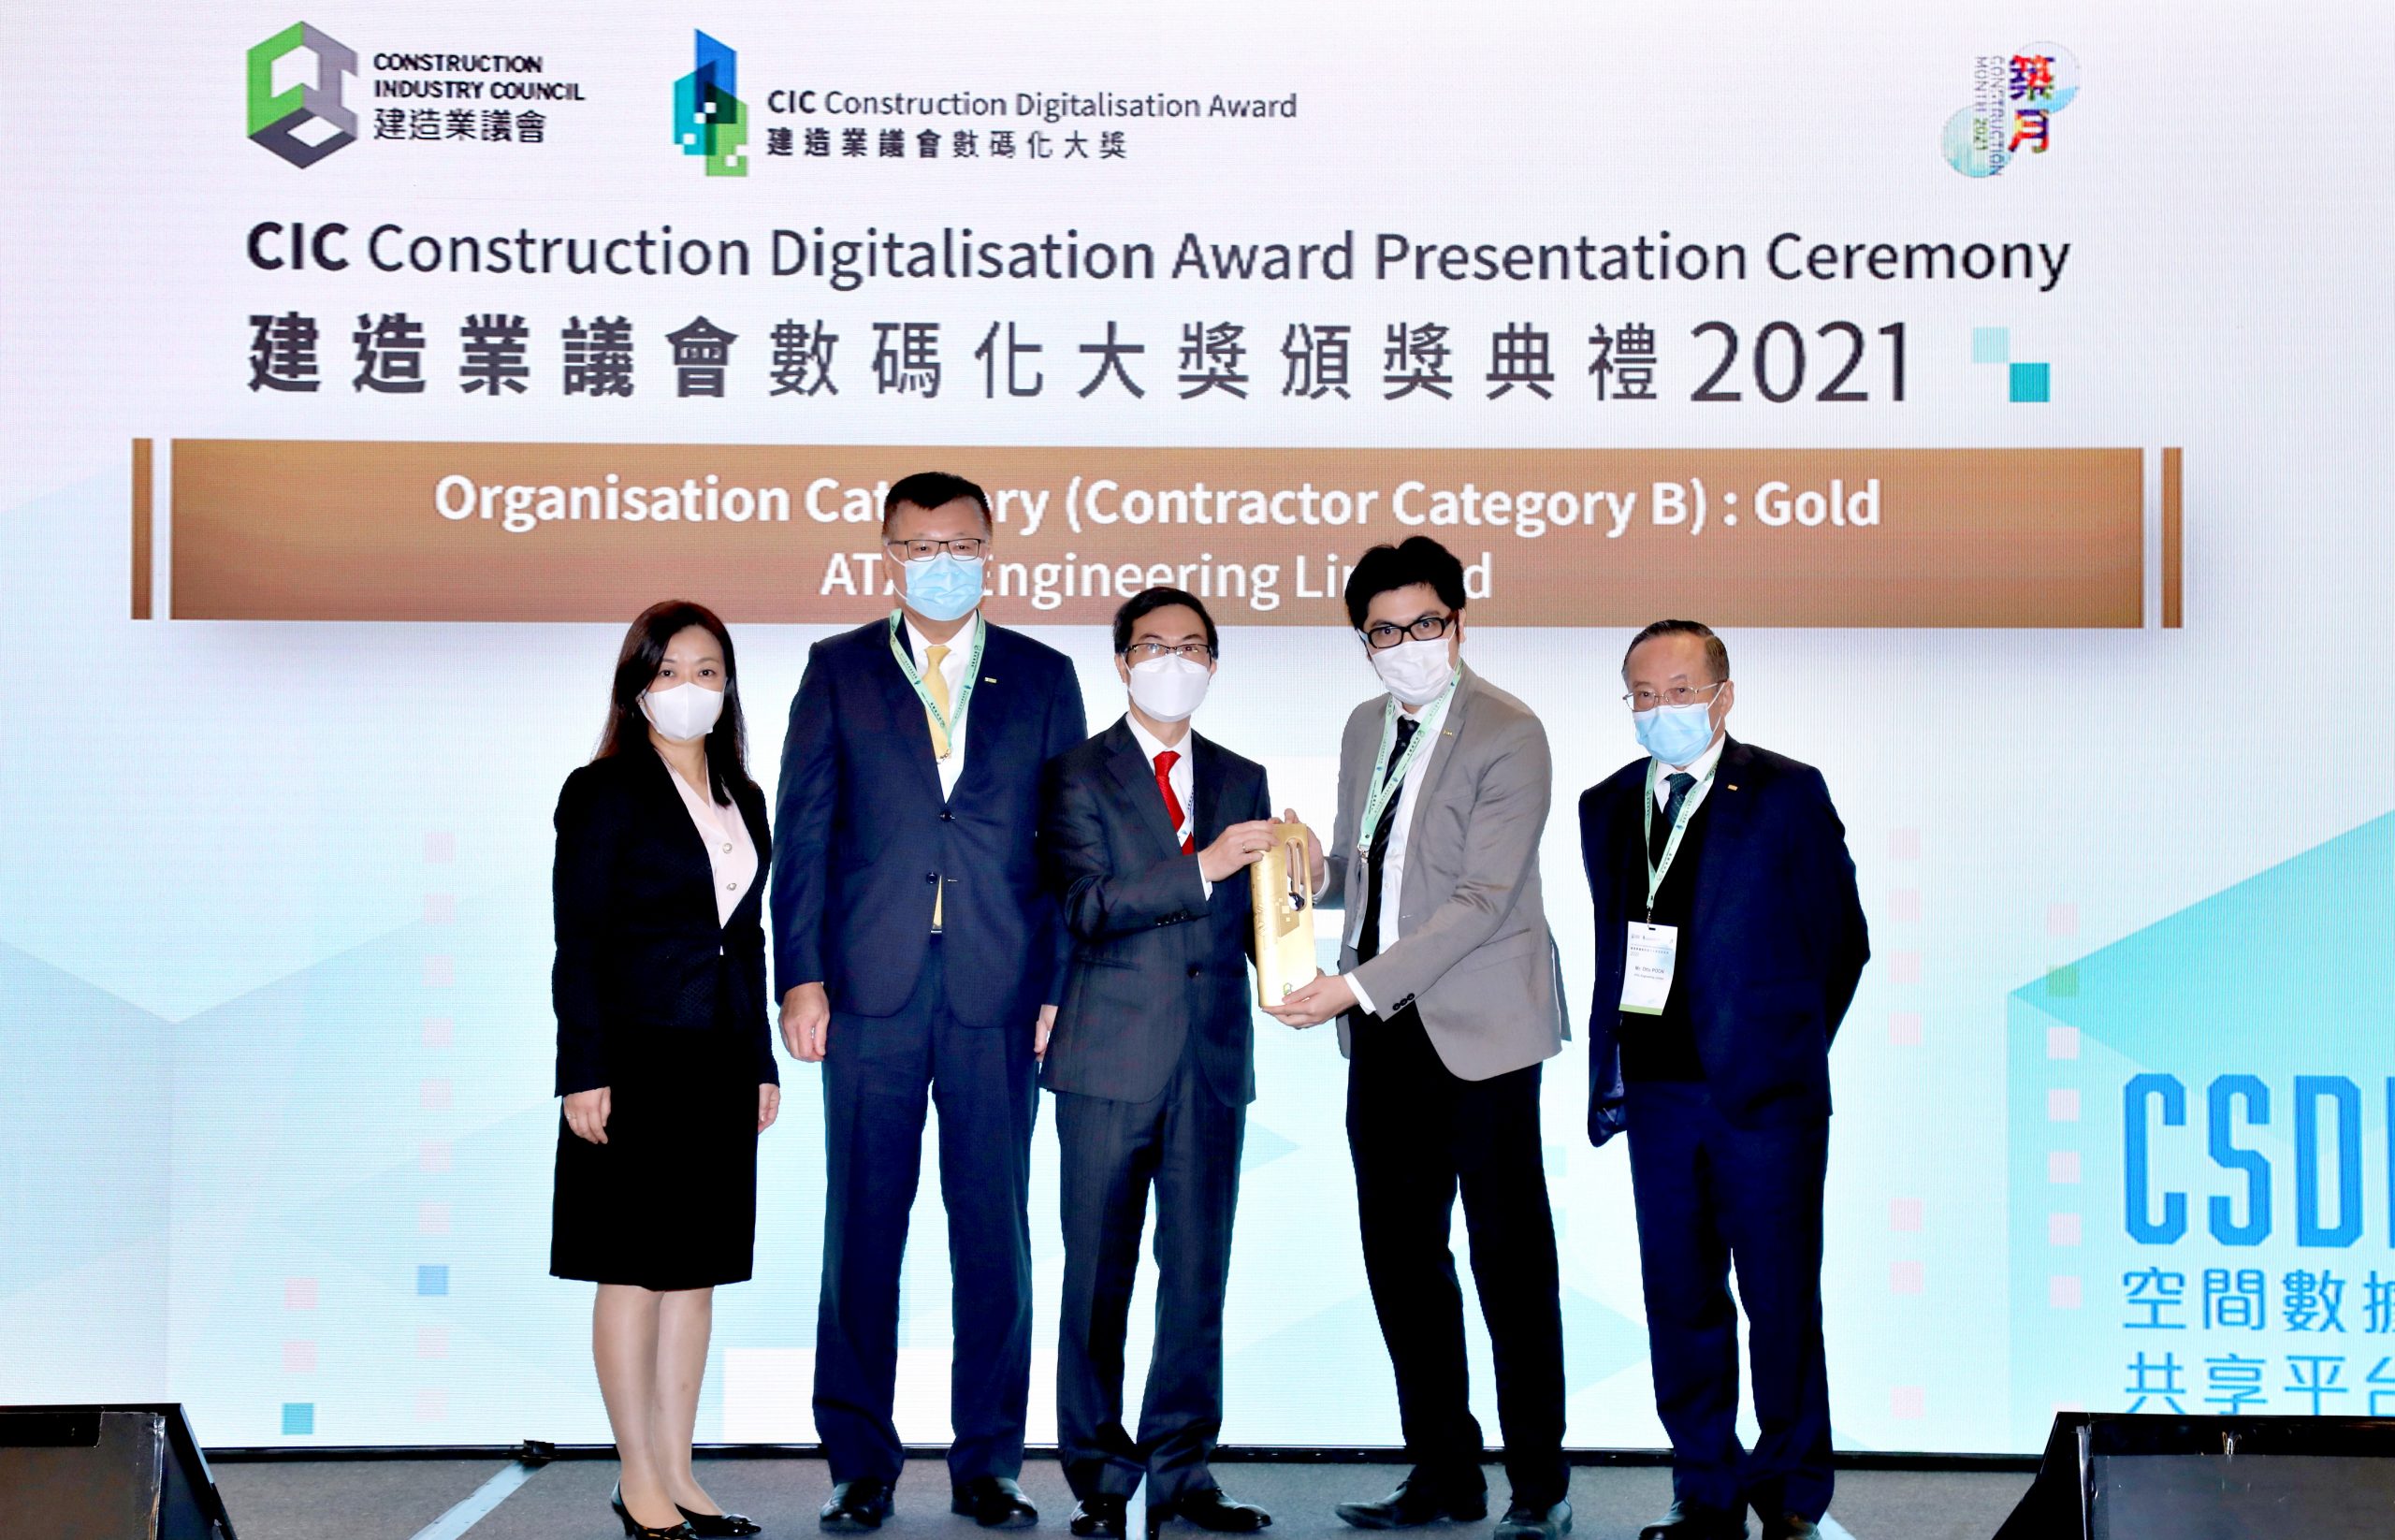 ATAL receives the “Organisation (Contractor Category B) Gold Award” at the CIC Construction Digitalisation Award Presentation Ceremony 2021